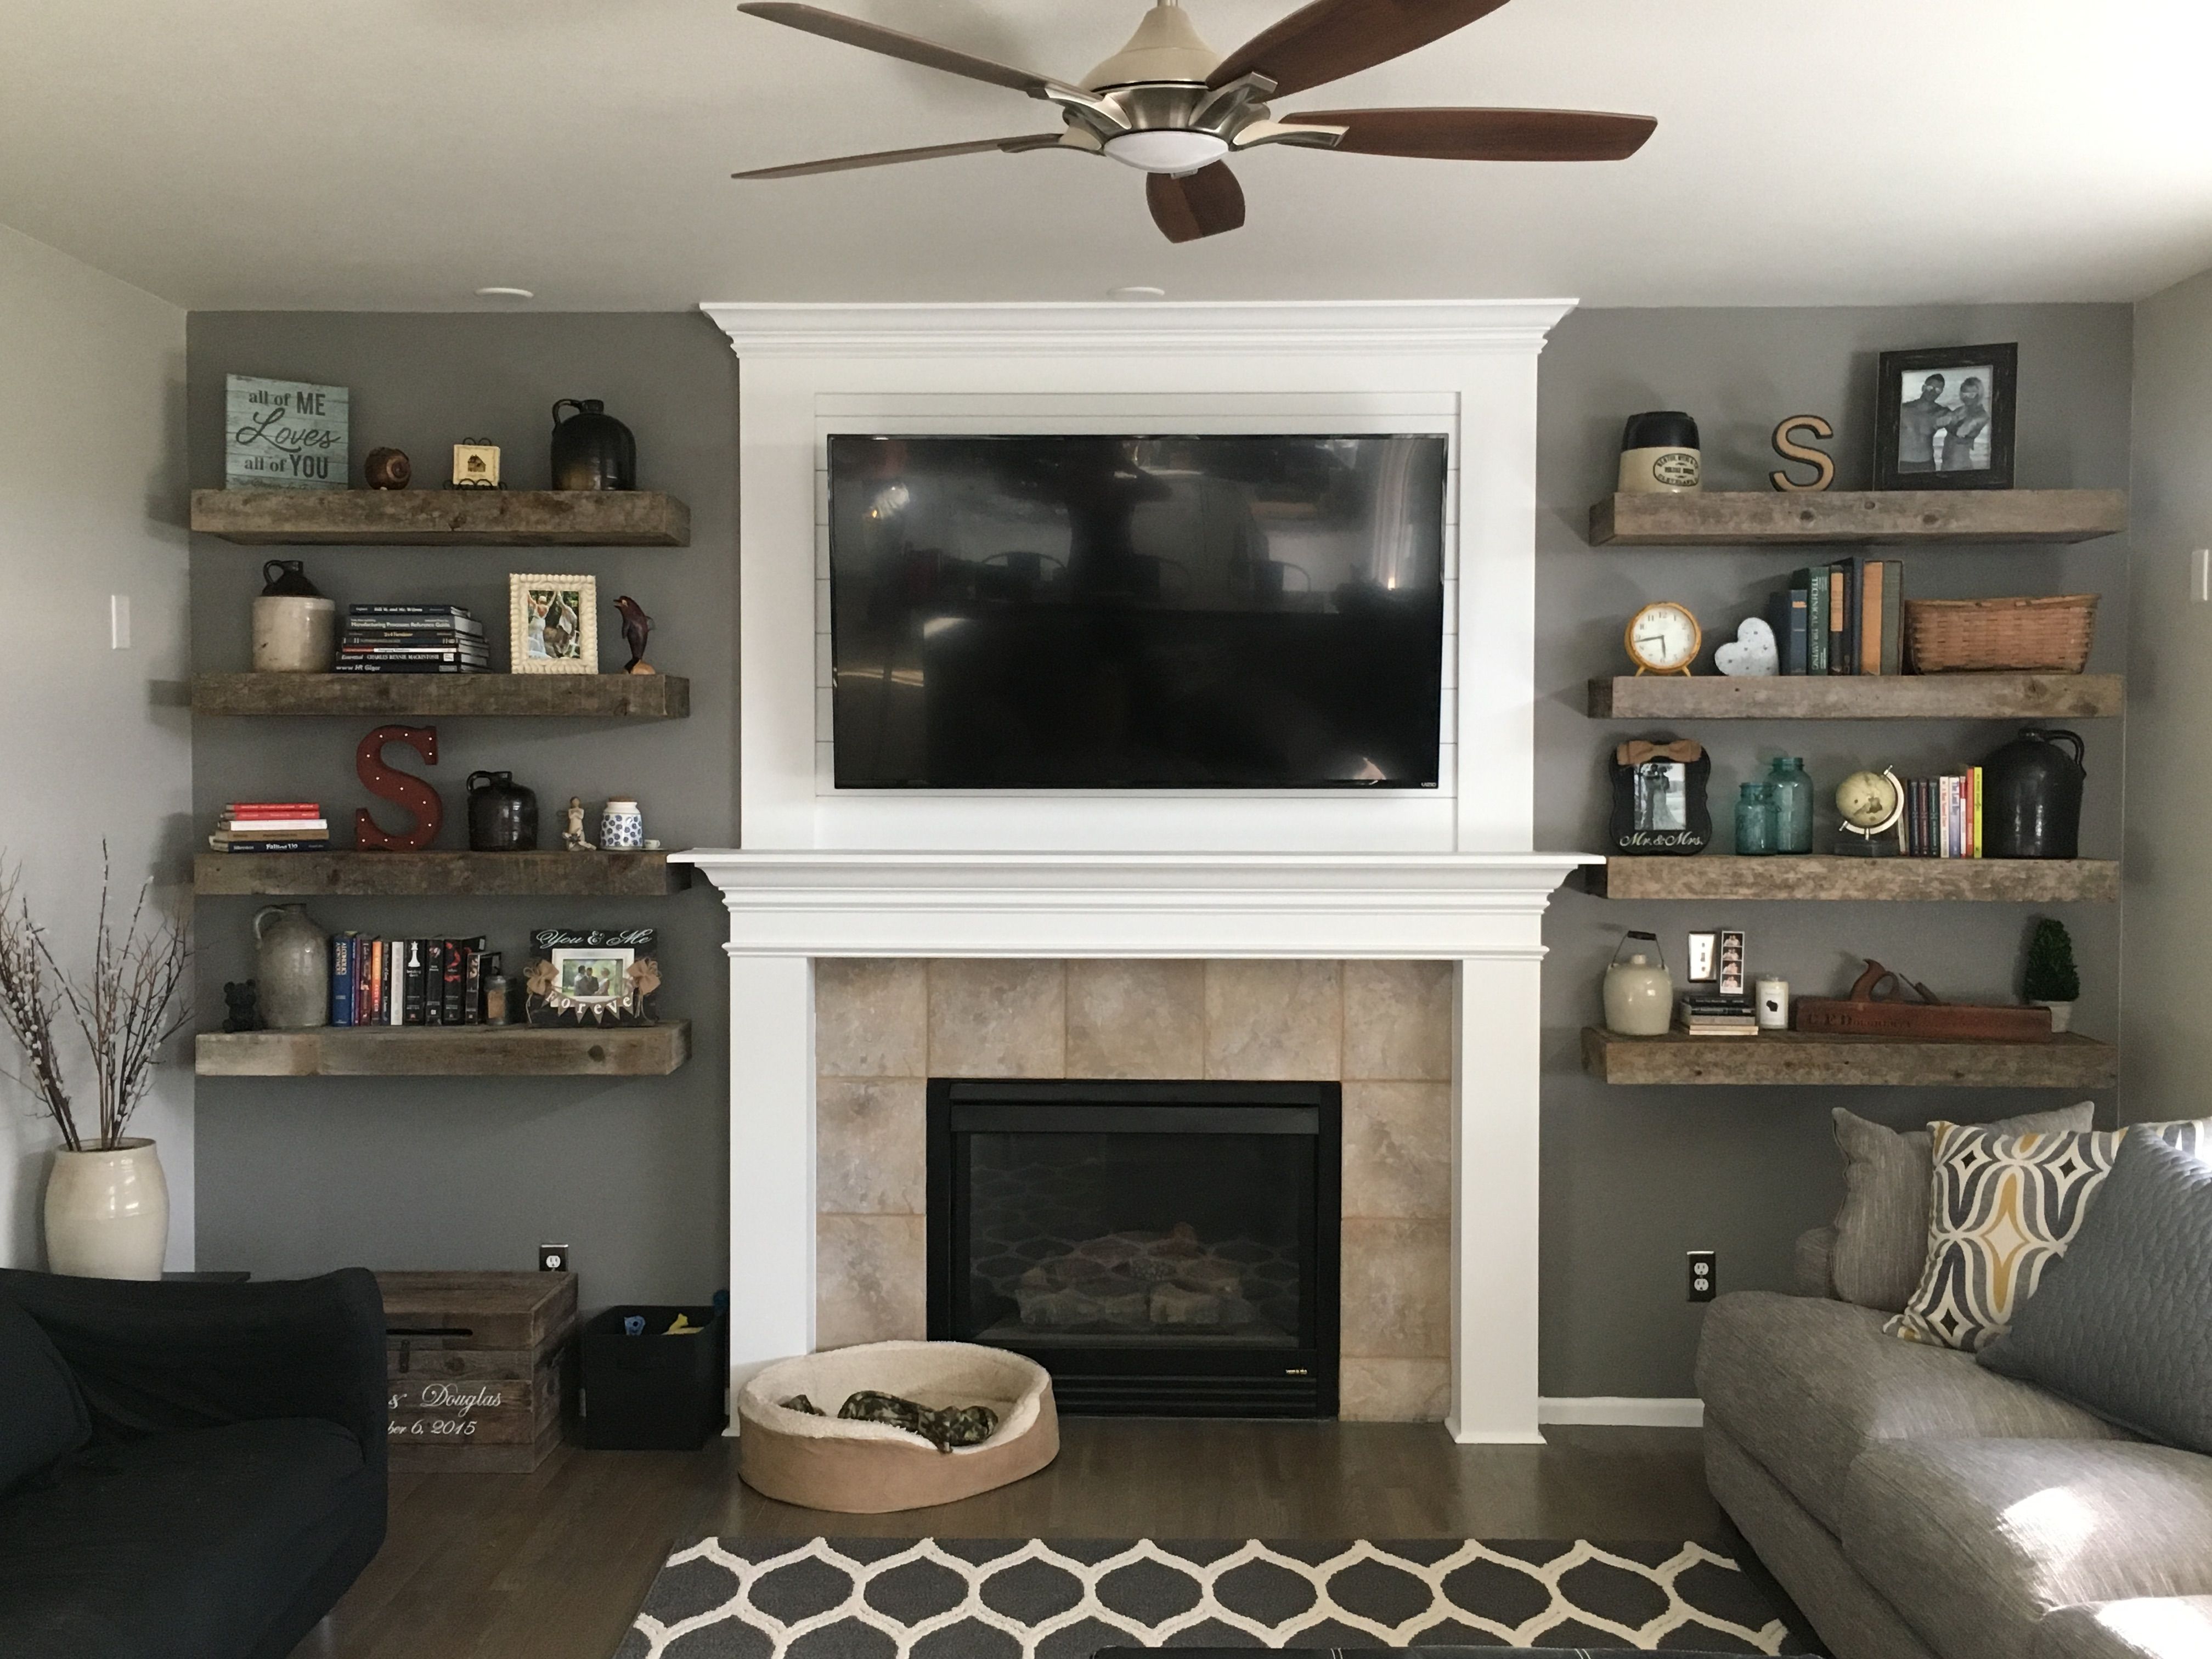 rustic living room barnwood floating shelves shiplap fireplace beside books and decor home sweet husband did the shower screen seal homebase wall desk with walls coat hooks